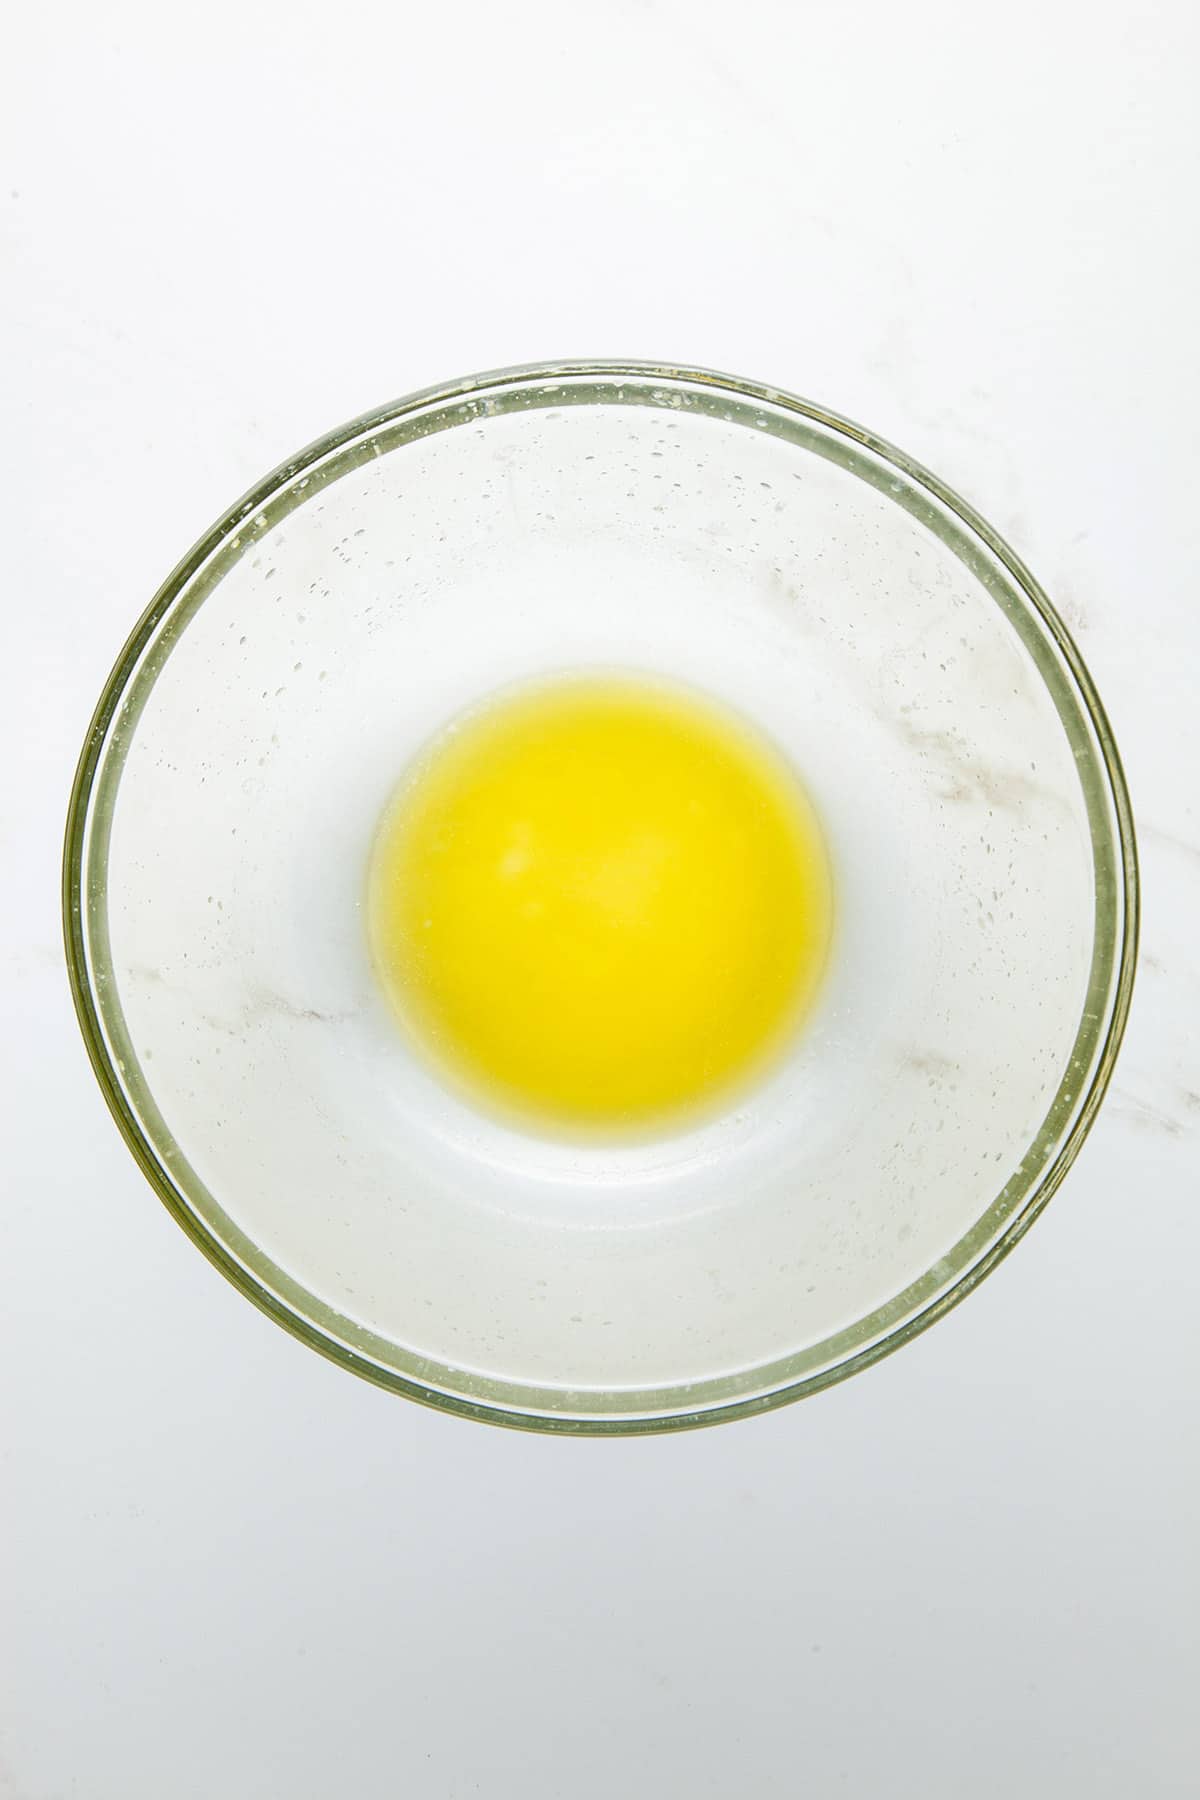 A glass bowl of melted butter.